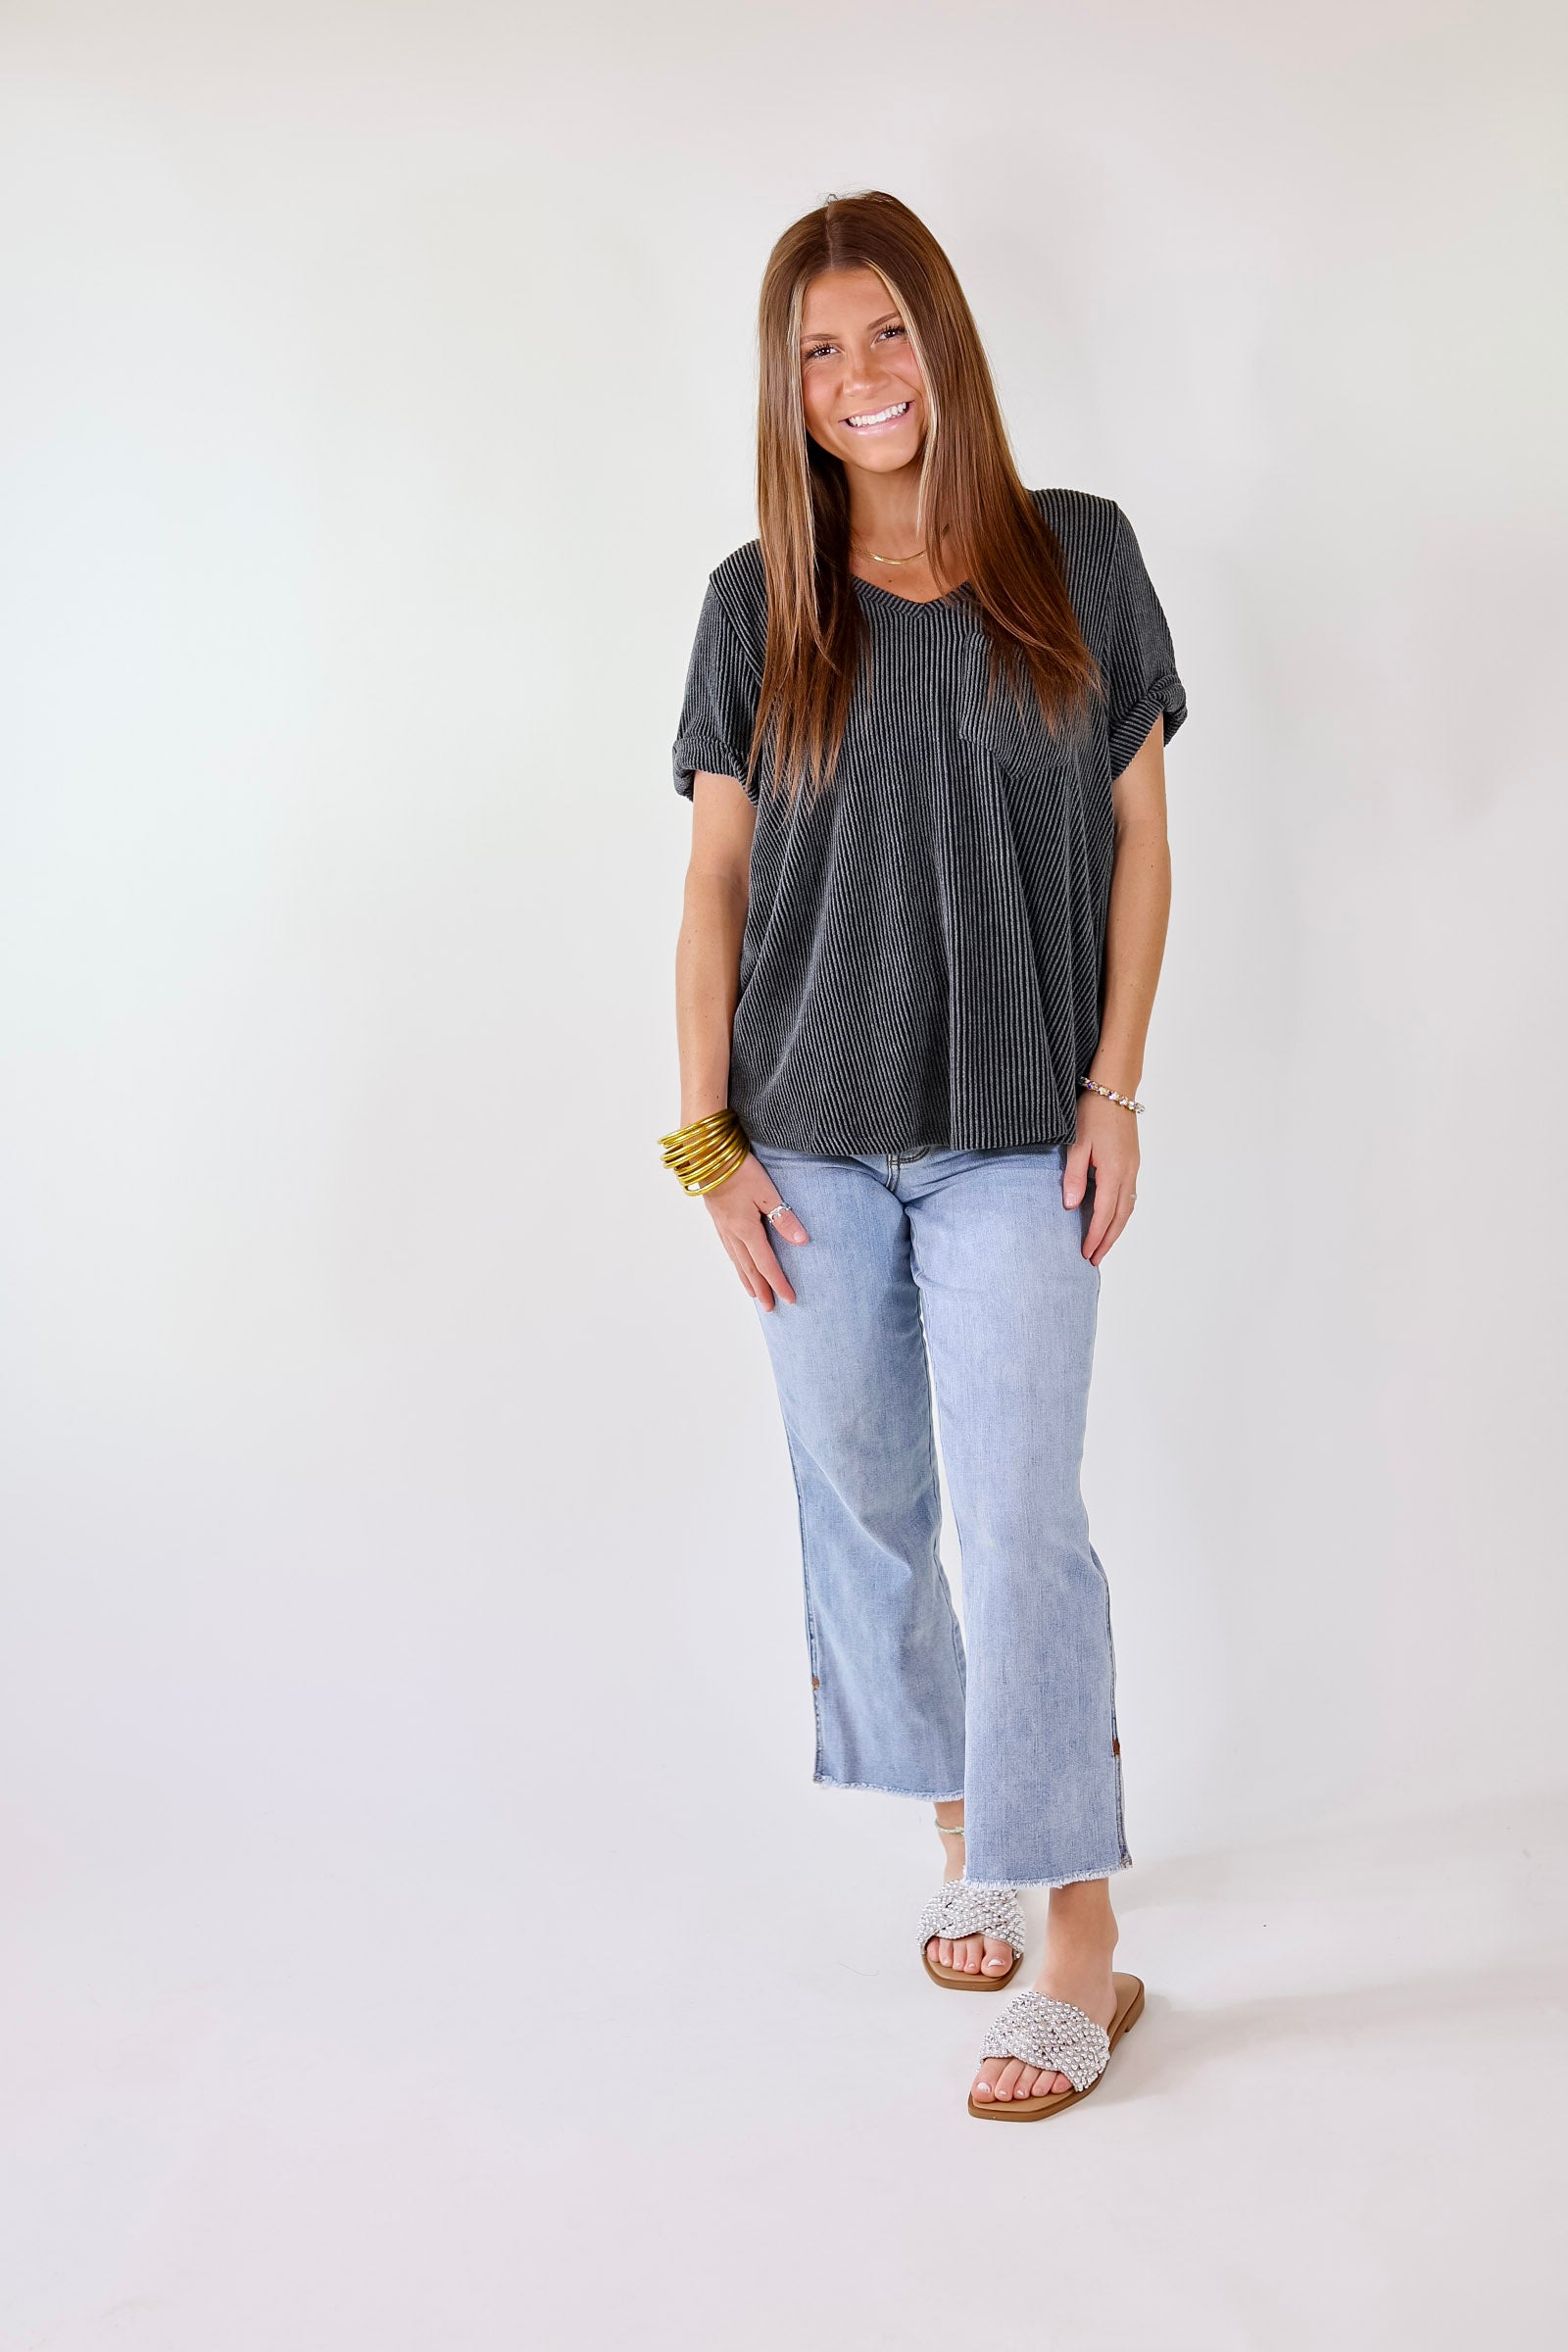 Only True Love Ribbed Short Sleeve Top with Front Pocket in Charcoal Black